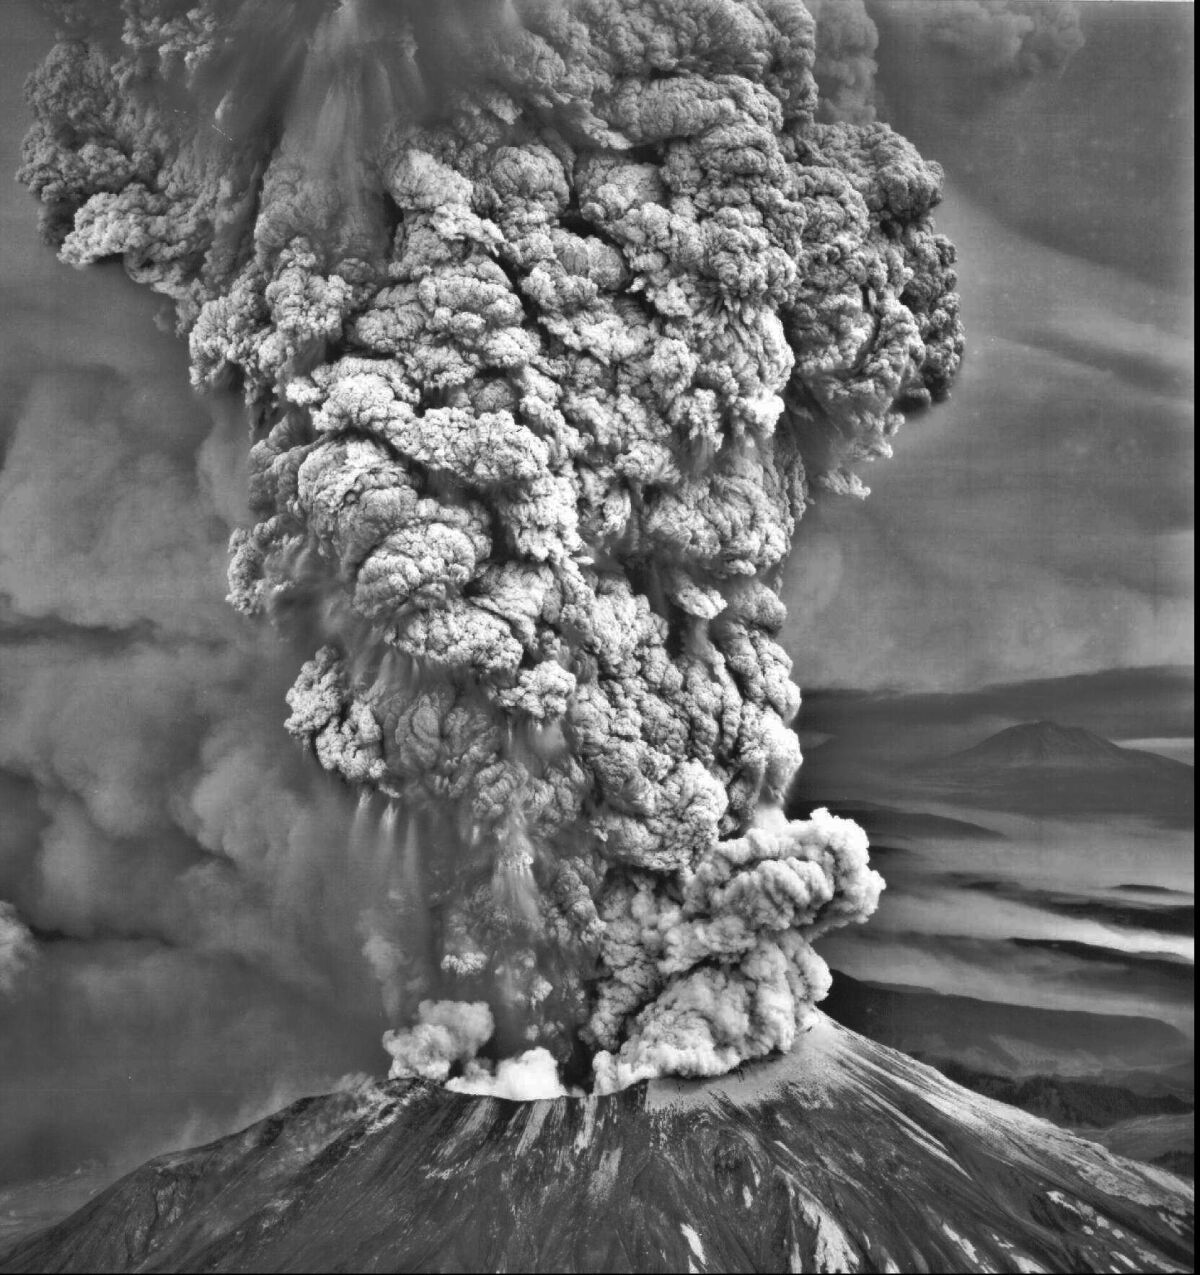 Mt. St. Helens erupted on May 18, 1980, sending a column of ash 15 miles high in less than 15 minutes, which caused complete darkness in Spokane, 250 miles east.